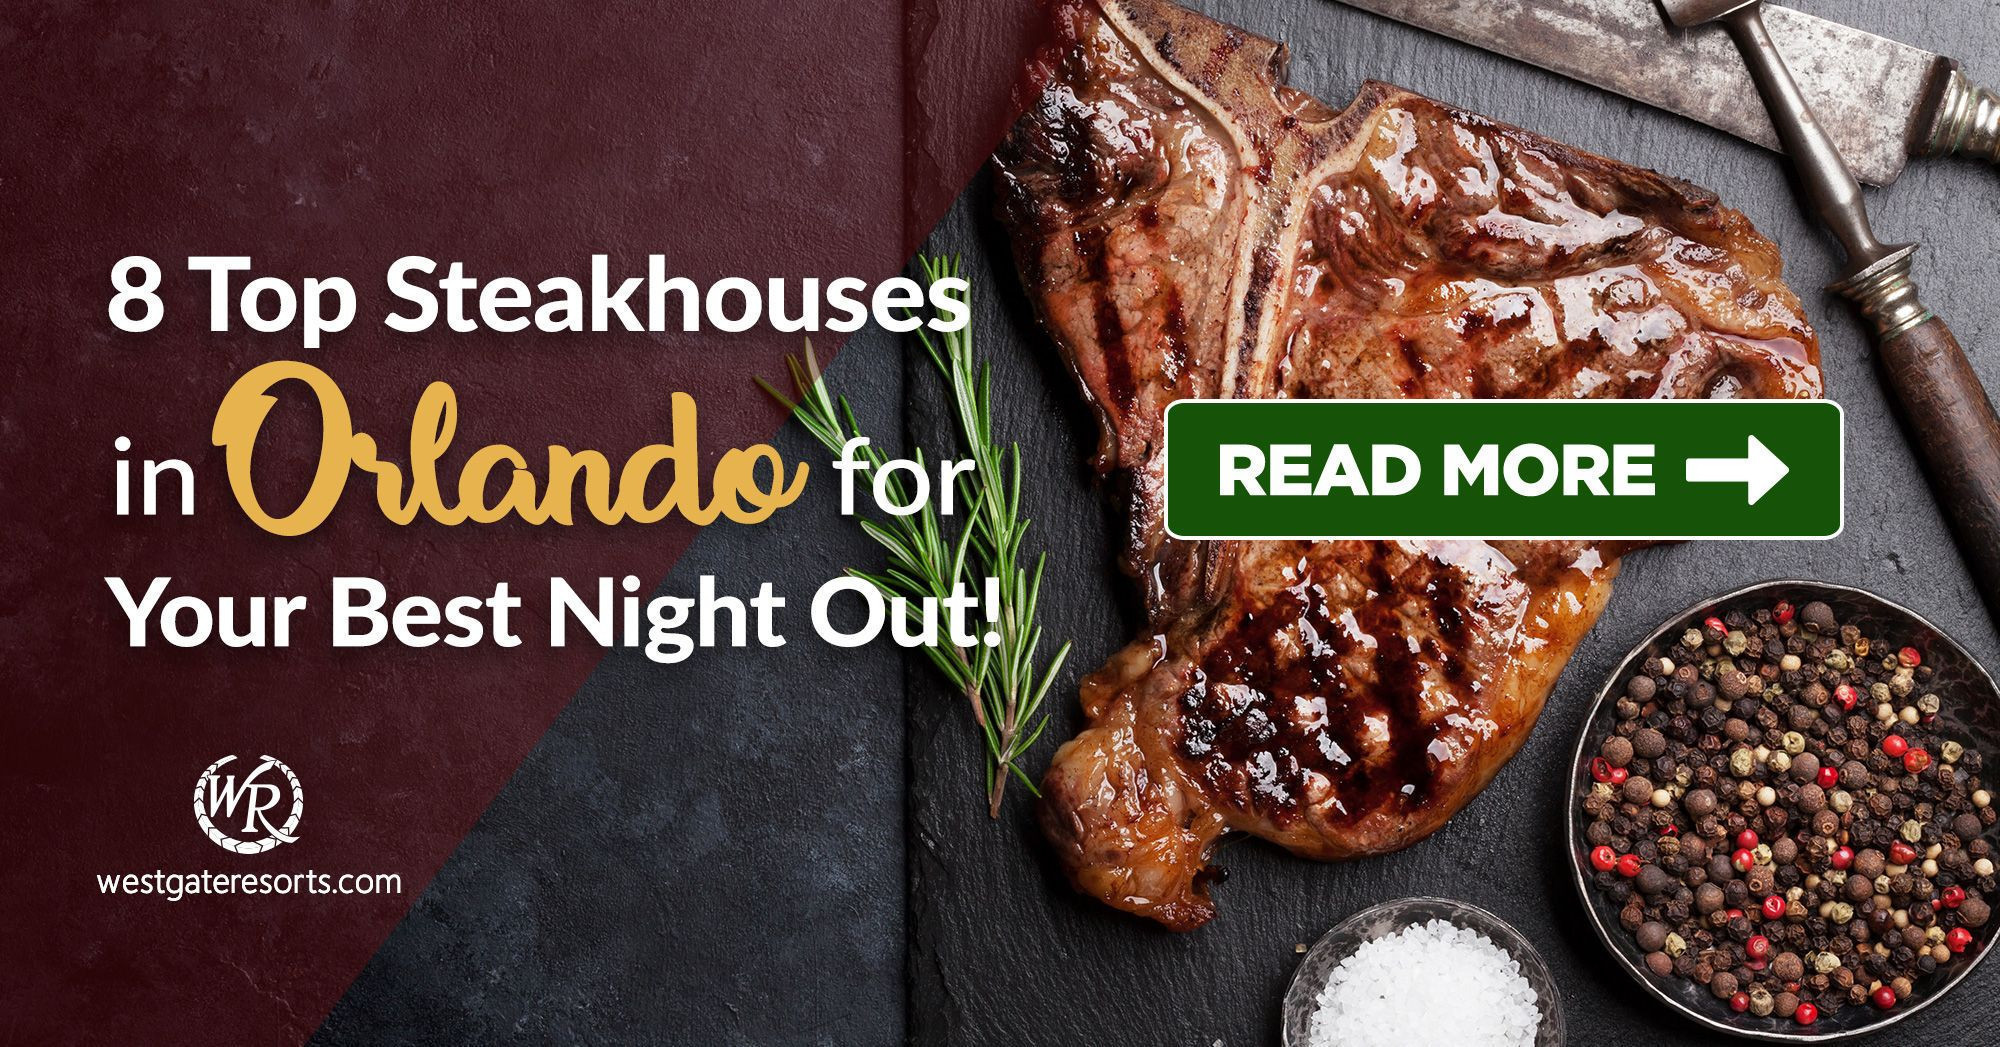 8 Top Steakhouses in Orlando for Your Best Night Out!